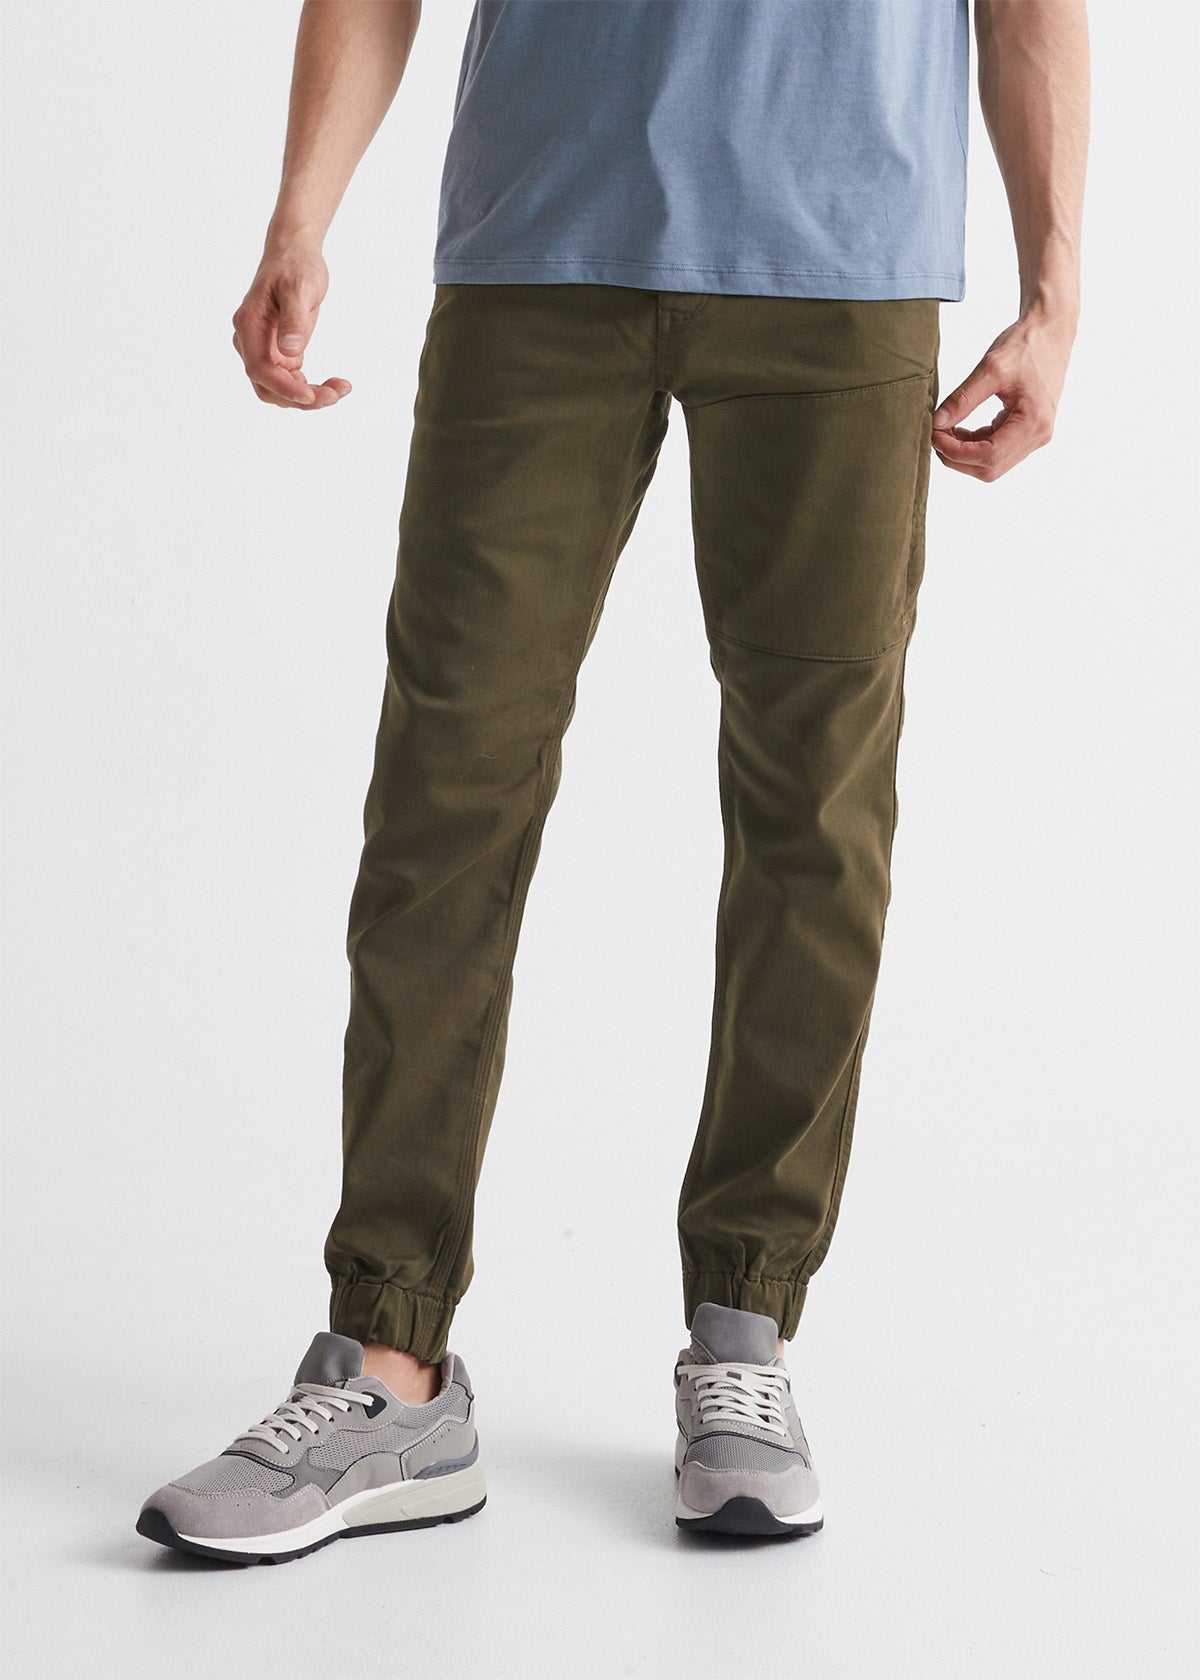 Men's Slim Fit Jeans & Pants - DUER – Tagged joggers